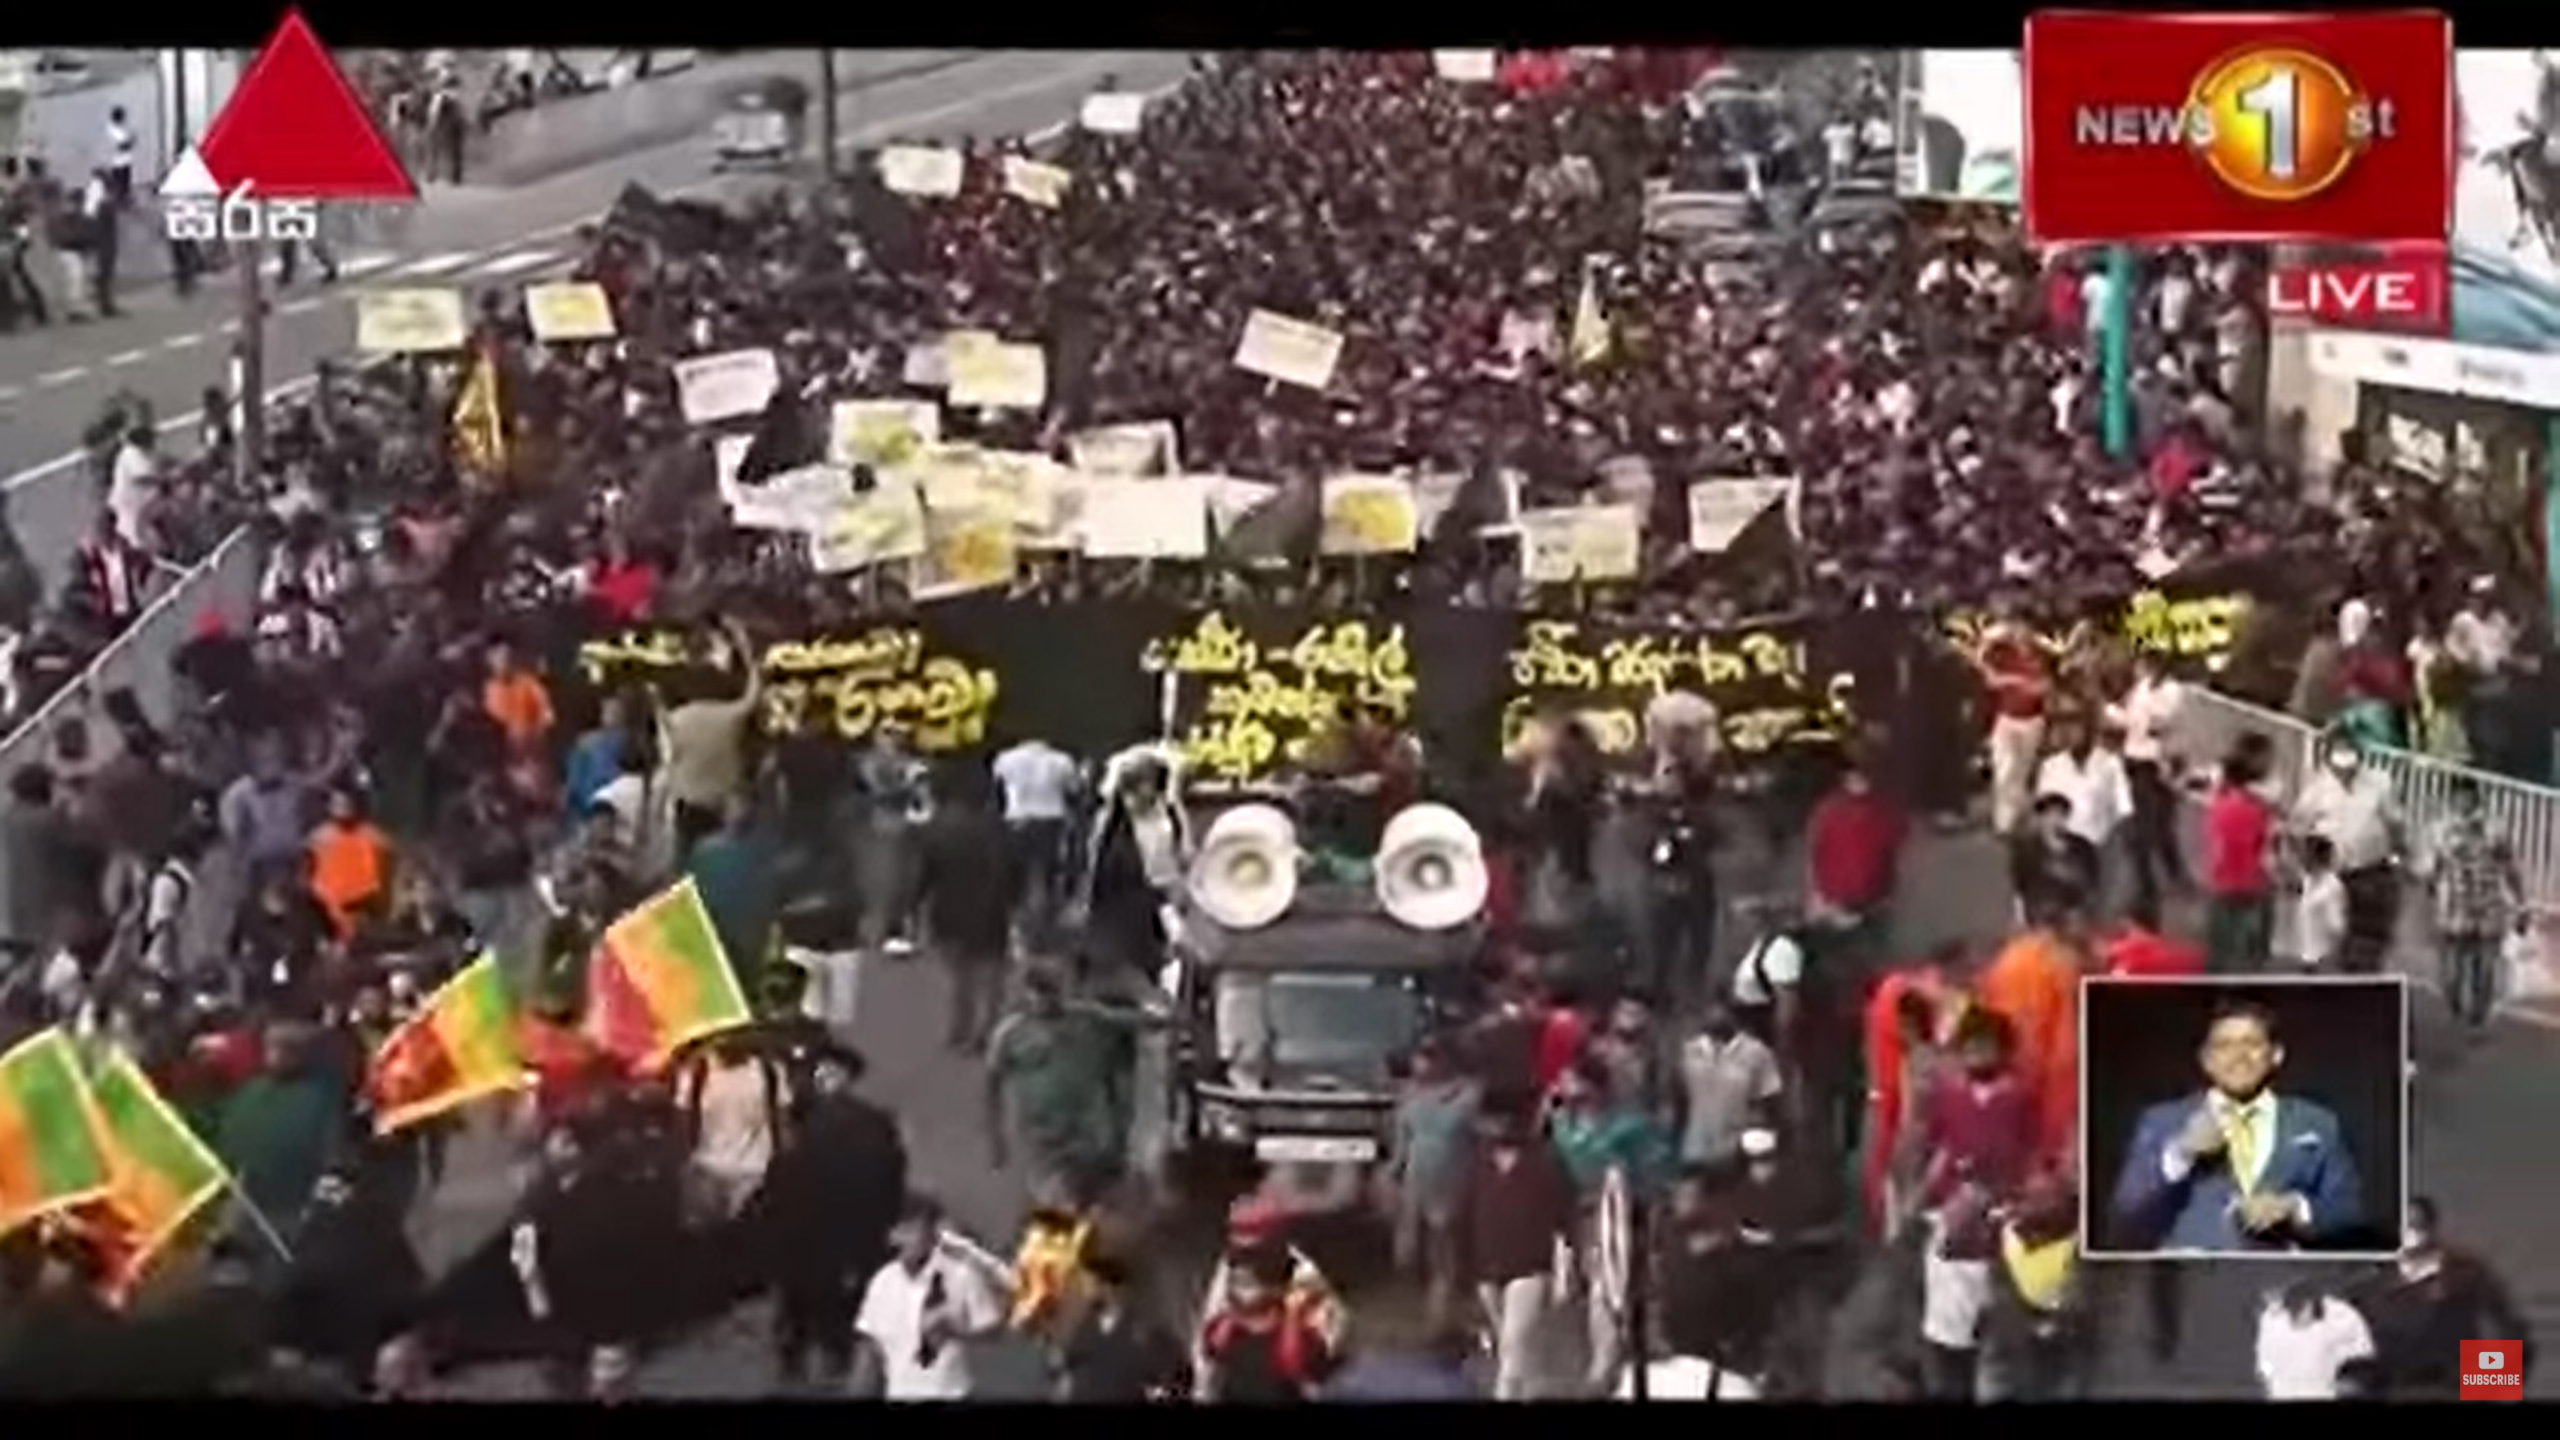 Protesters march in Sri Lanka against the financial crisis and government corruption, 8 July 2022. Photo: News 1st Prime Time Sinhala News / YouTube